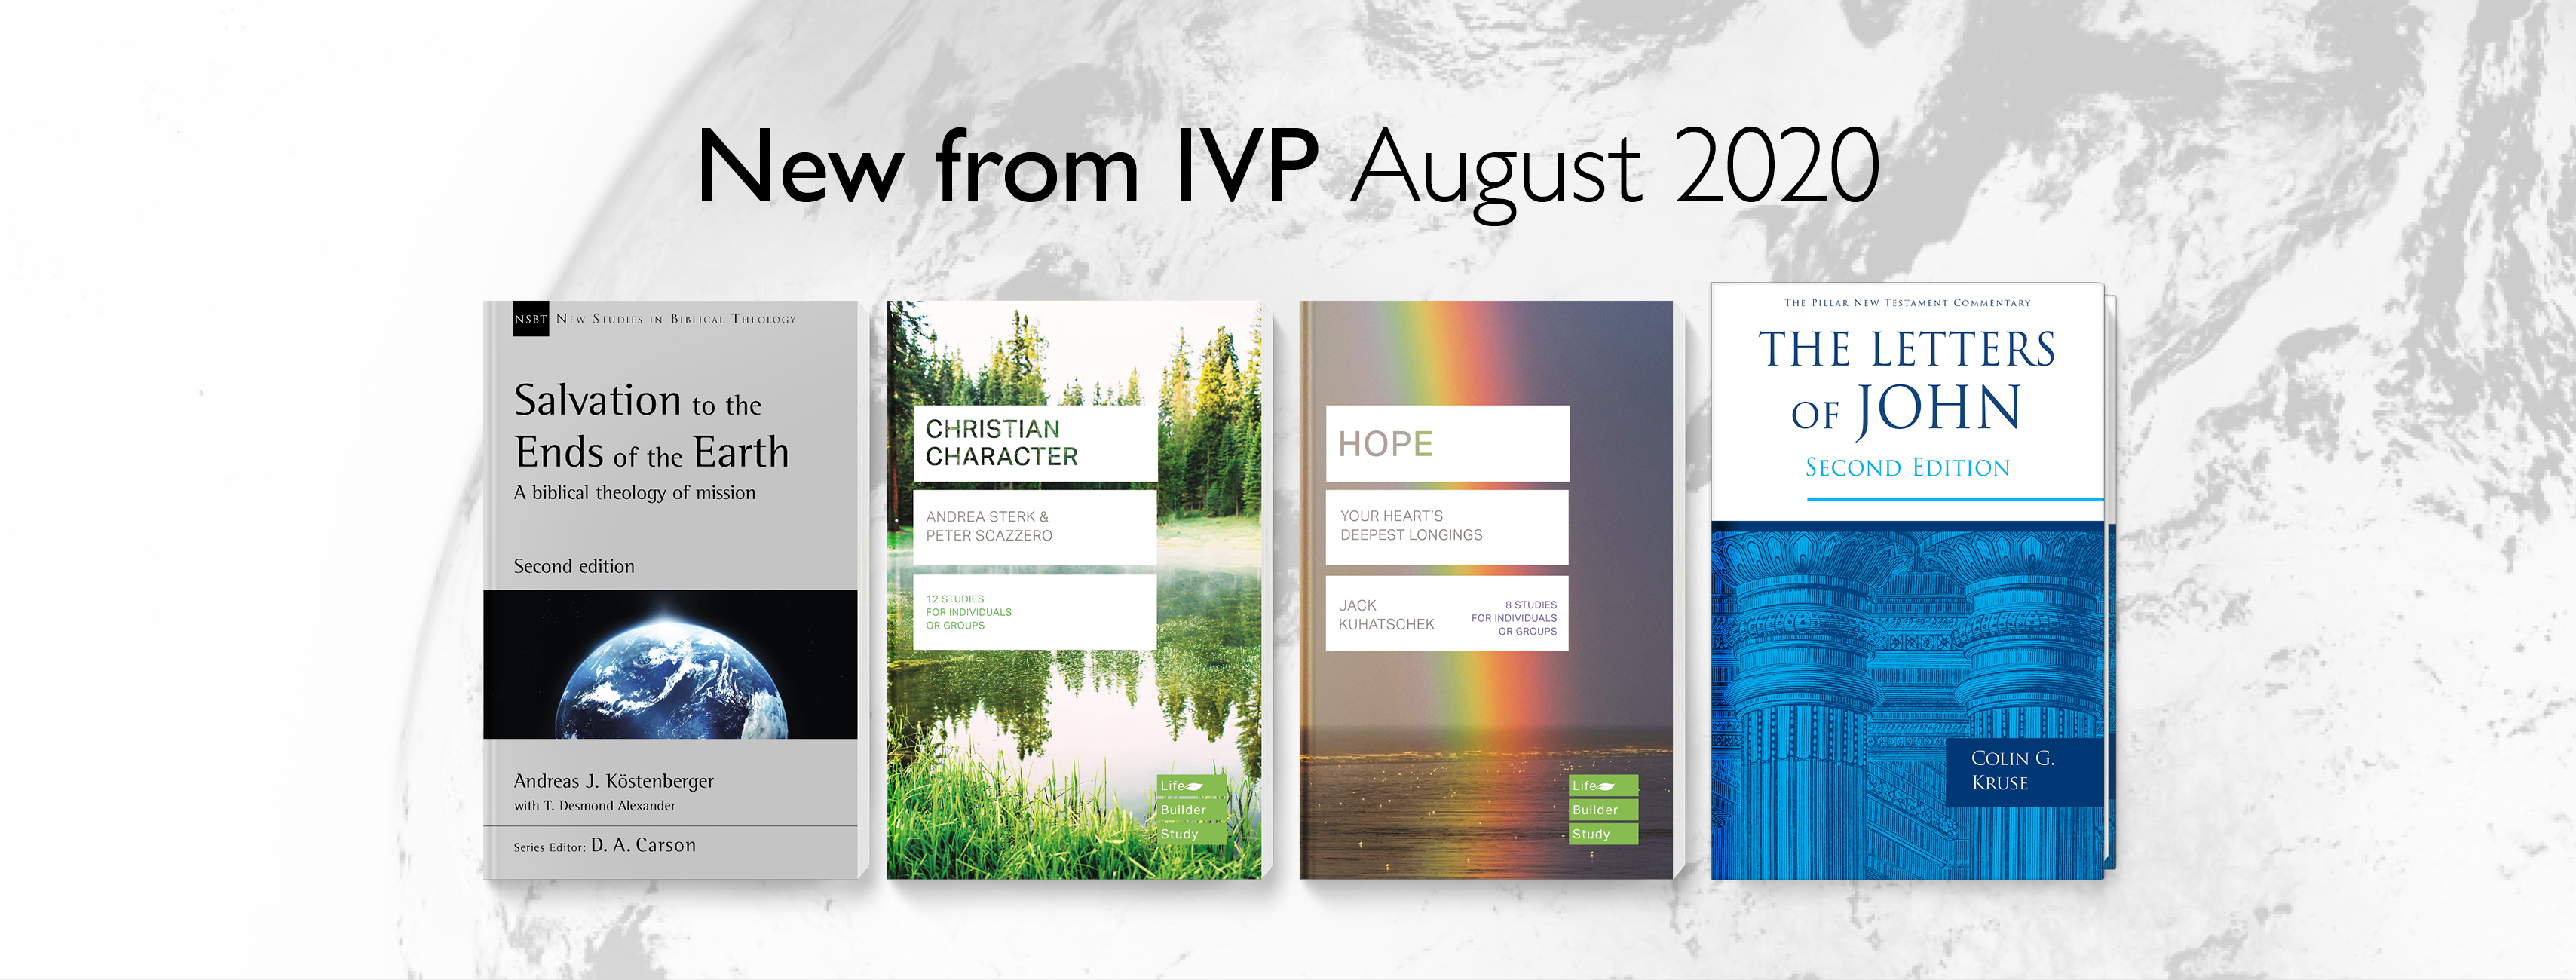 The IVP August 2020 Releases